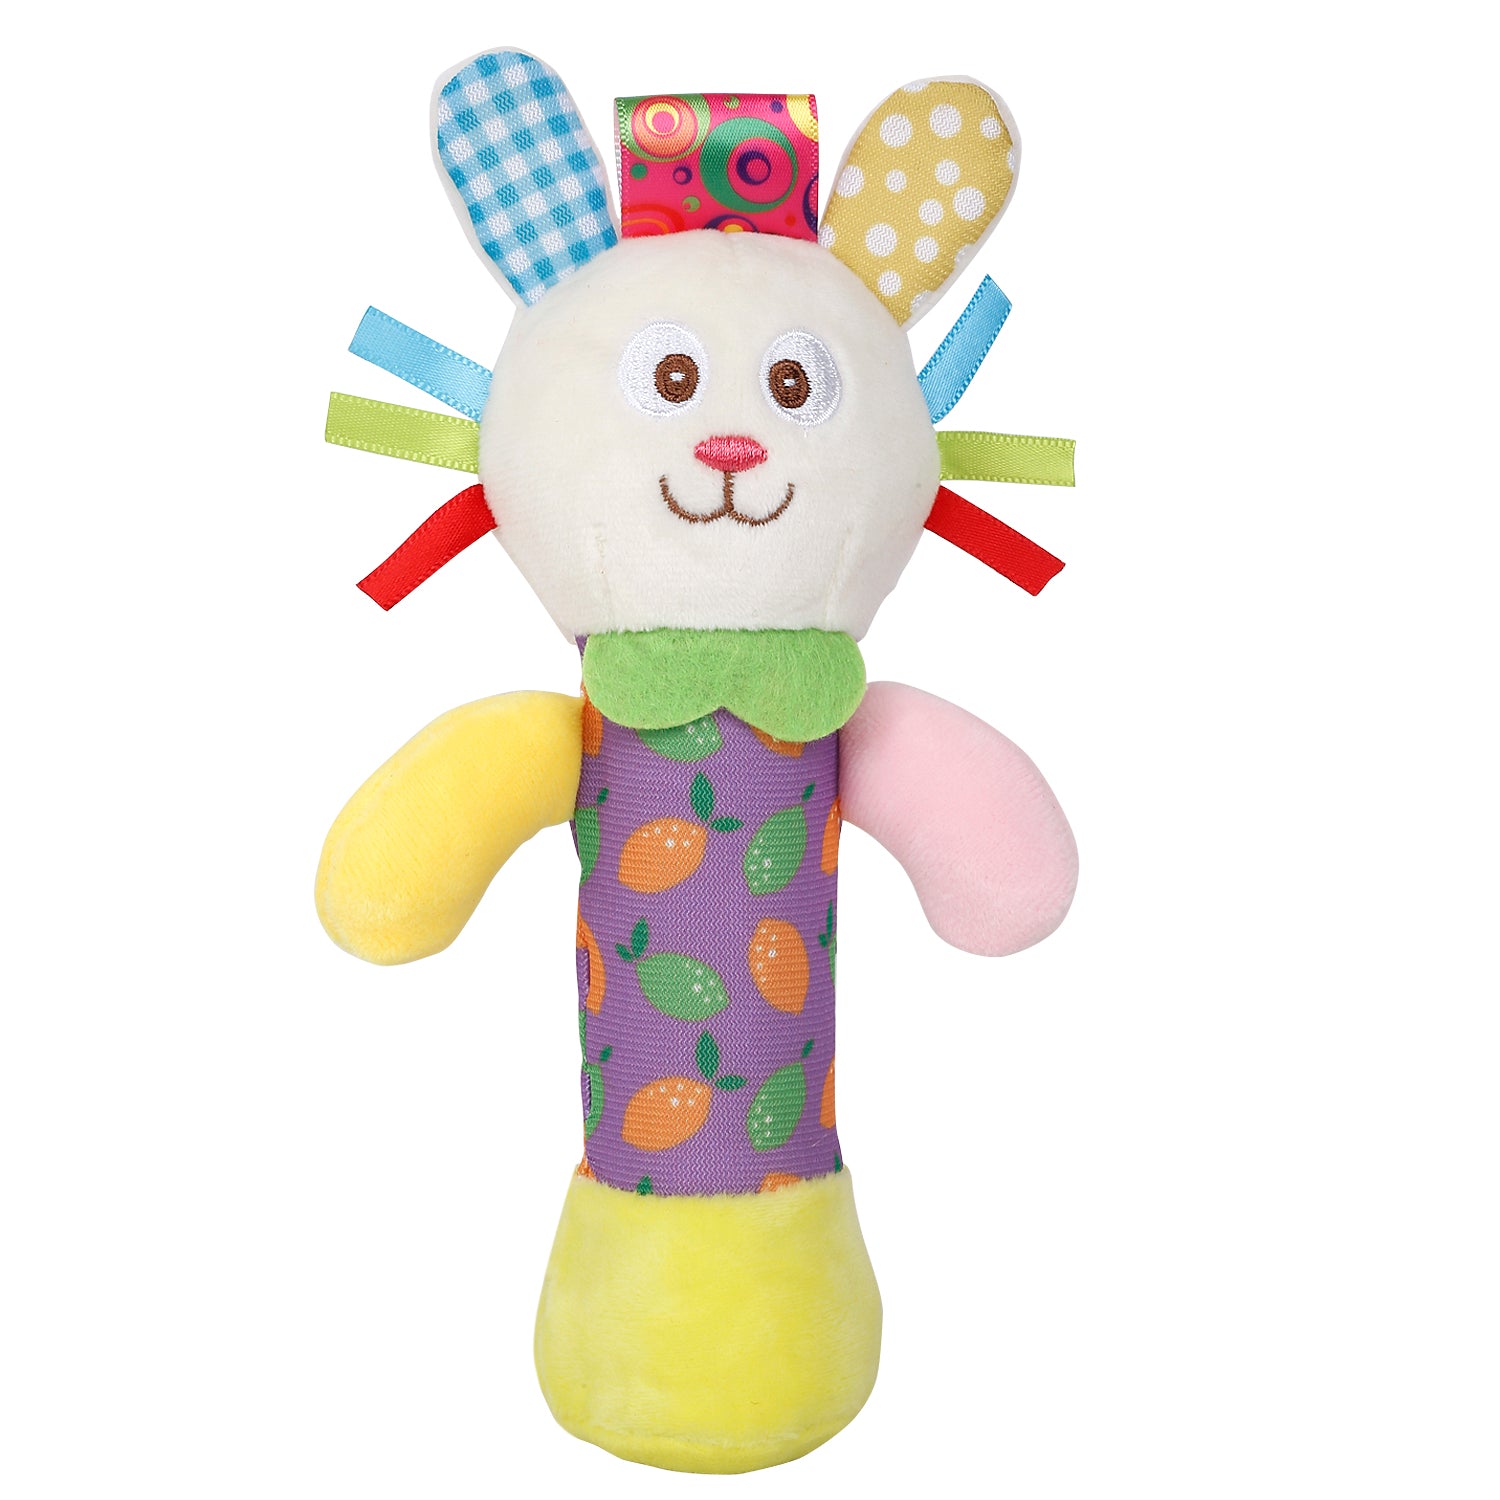 Hungry Rabbit Multicolour Handheld Rattle Toy - Baby Moo